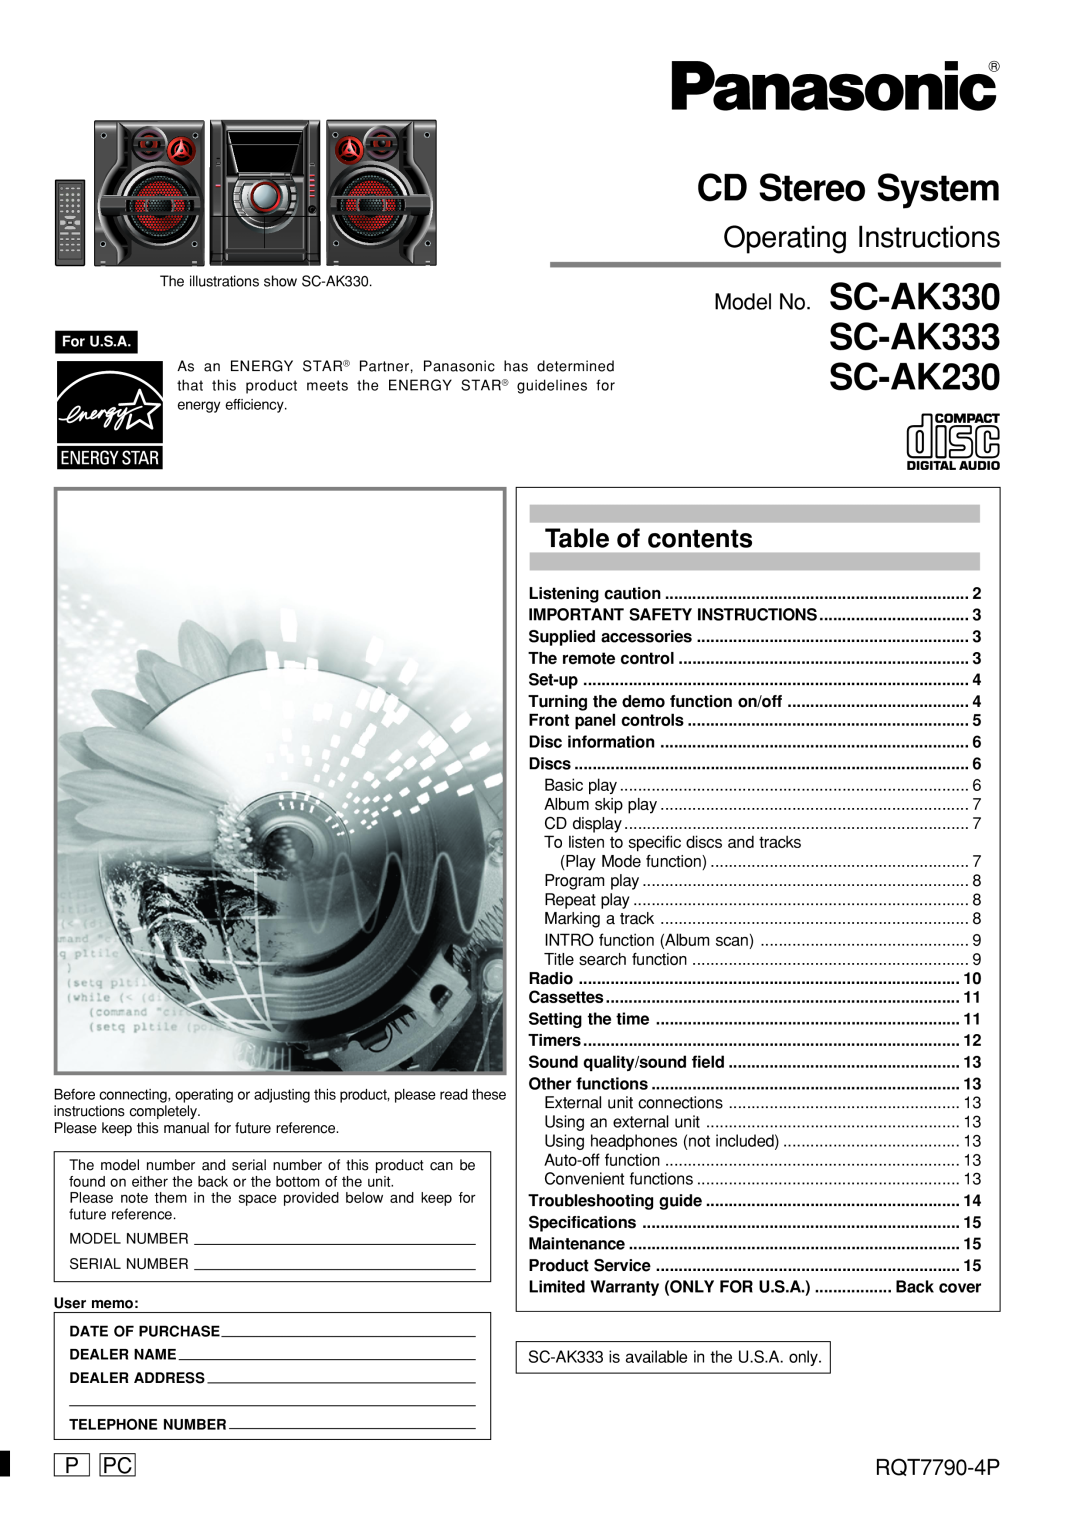 Panasonic SC-AK333 operating instructions Table of contents, Model No. SC-AK330, P Pc, RQT7790-4P, CD Stereo System 